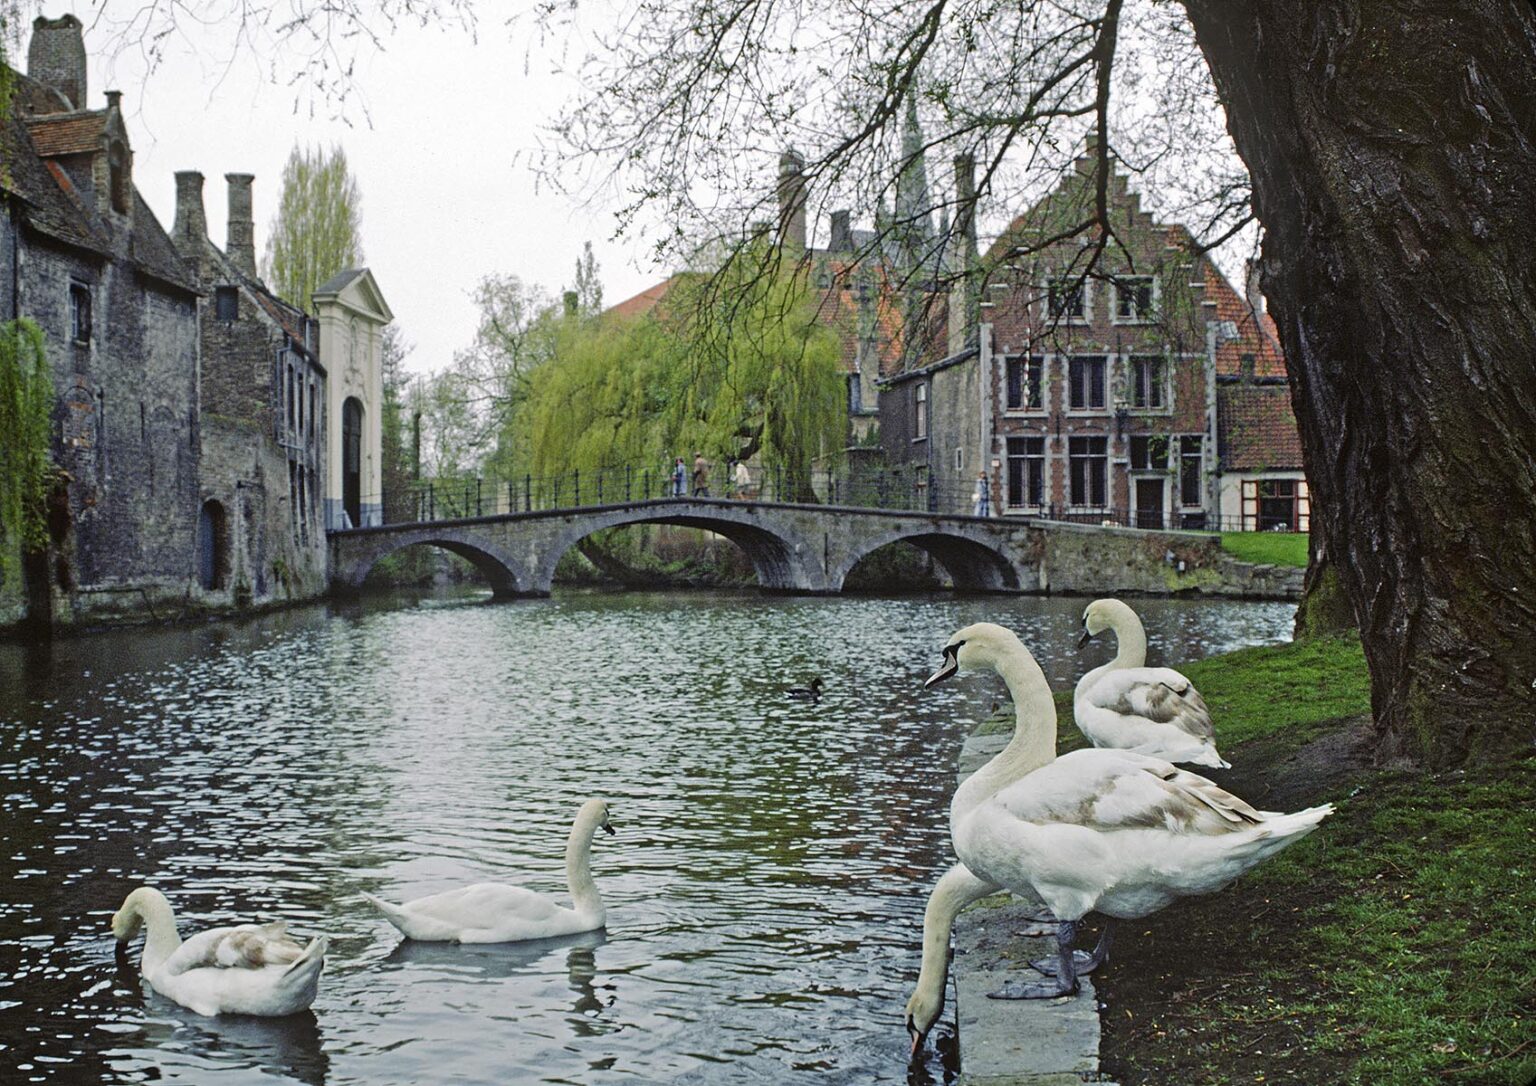 SWANS make their home in historic old BRUGGE - BELGIUM